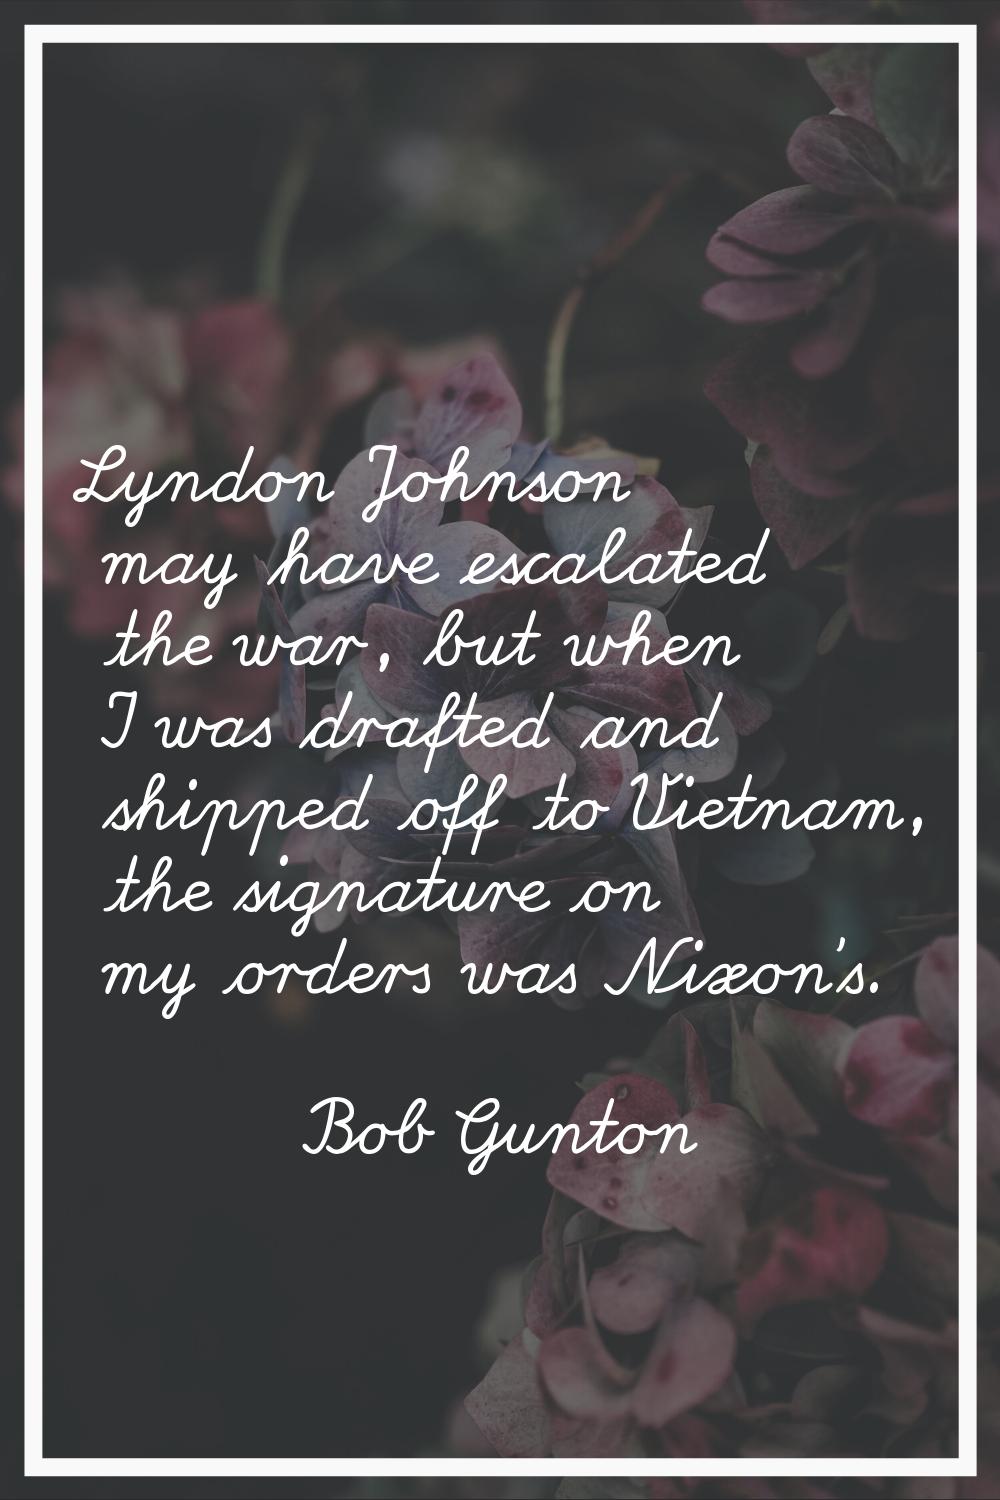 Lyndon Johnson may have escalated the war, but when I was drafted and shipped off to Vietnam, the s